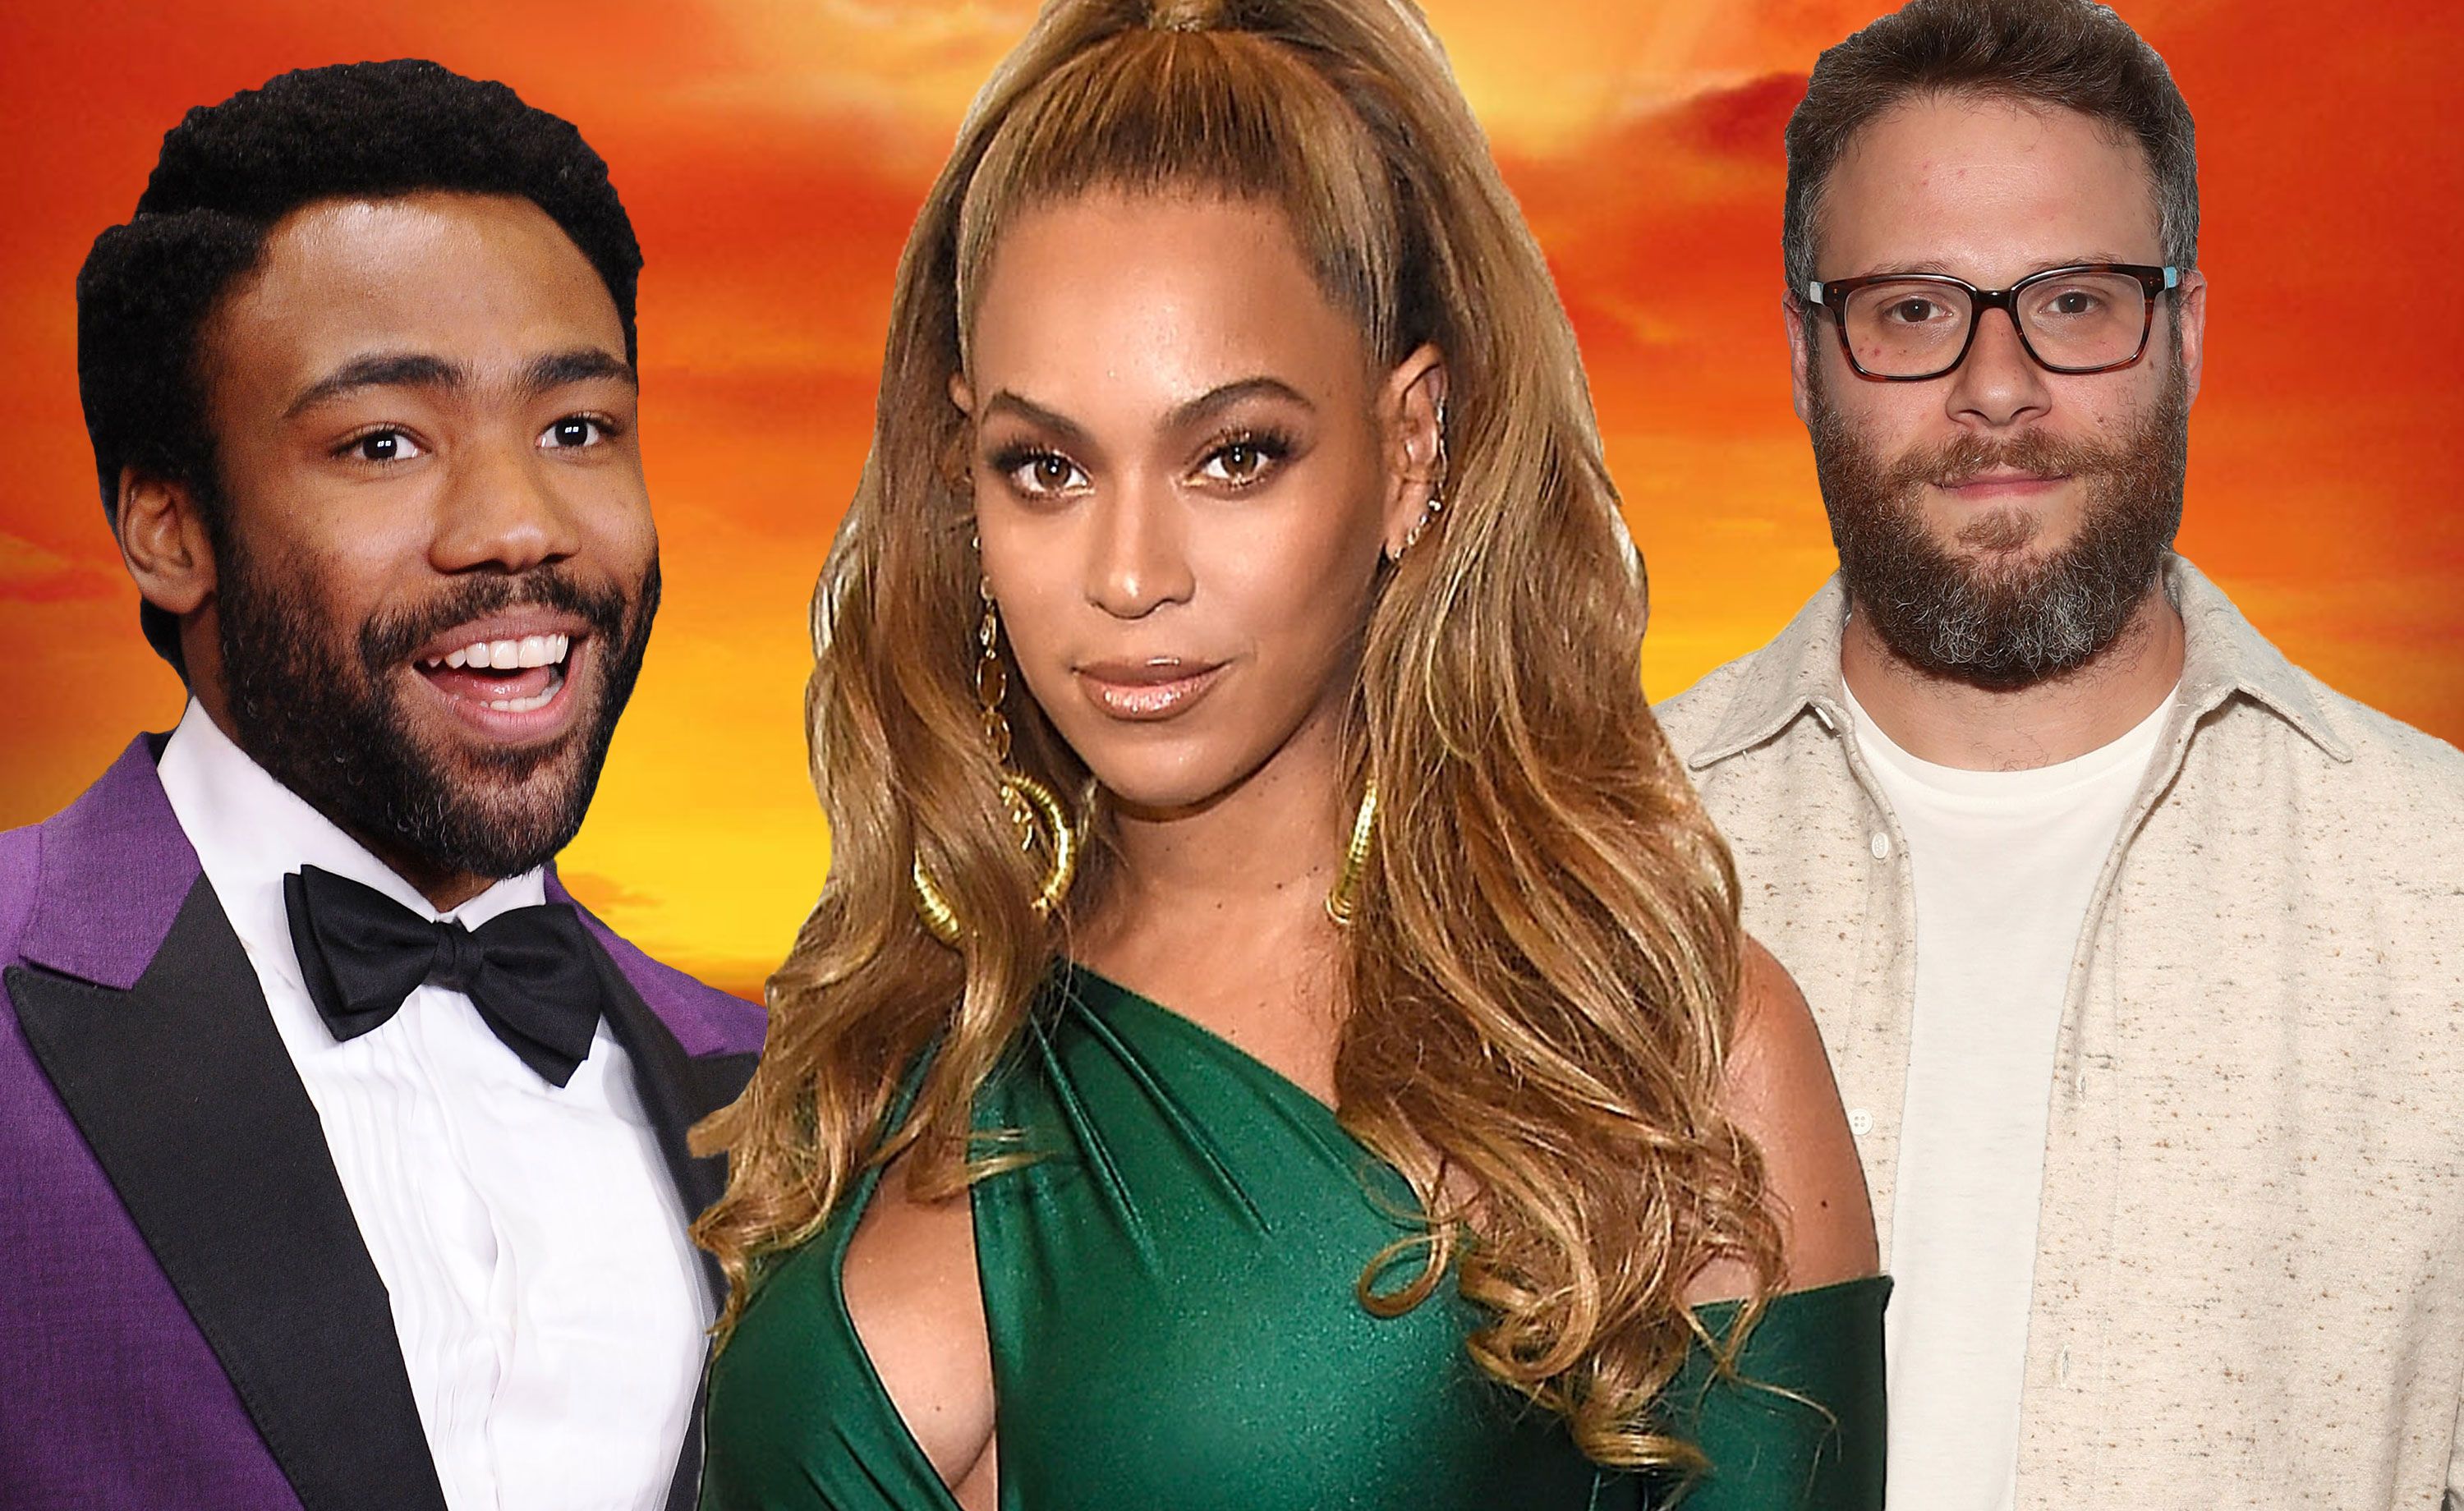 Disney S Lion King Live Action Remake Will Star Beyonce Seth Rogen And Chiwetel Ejiofor